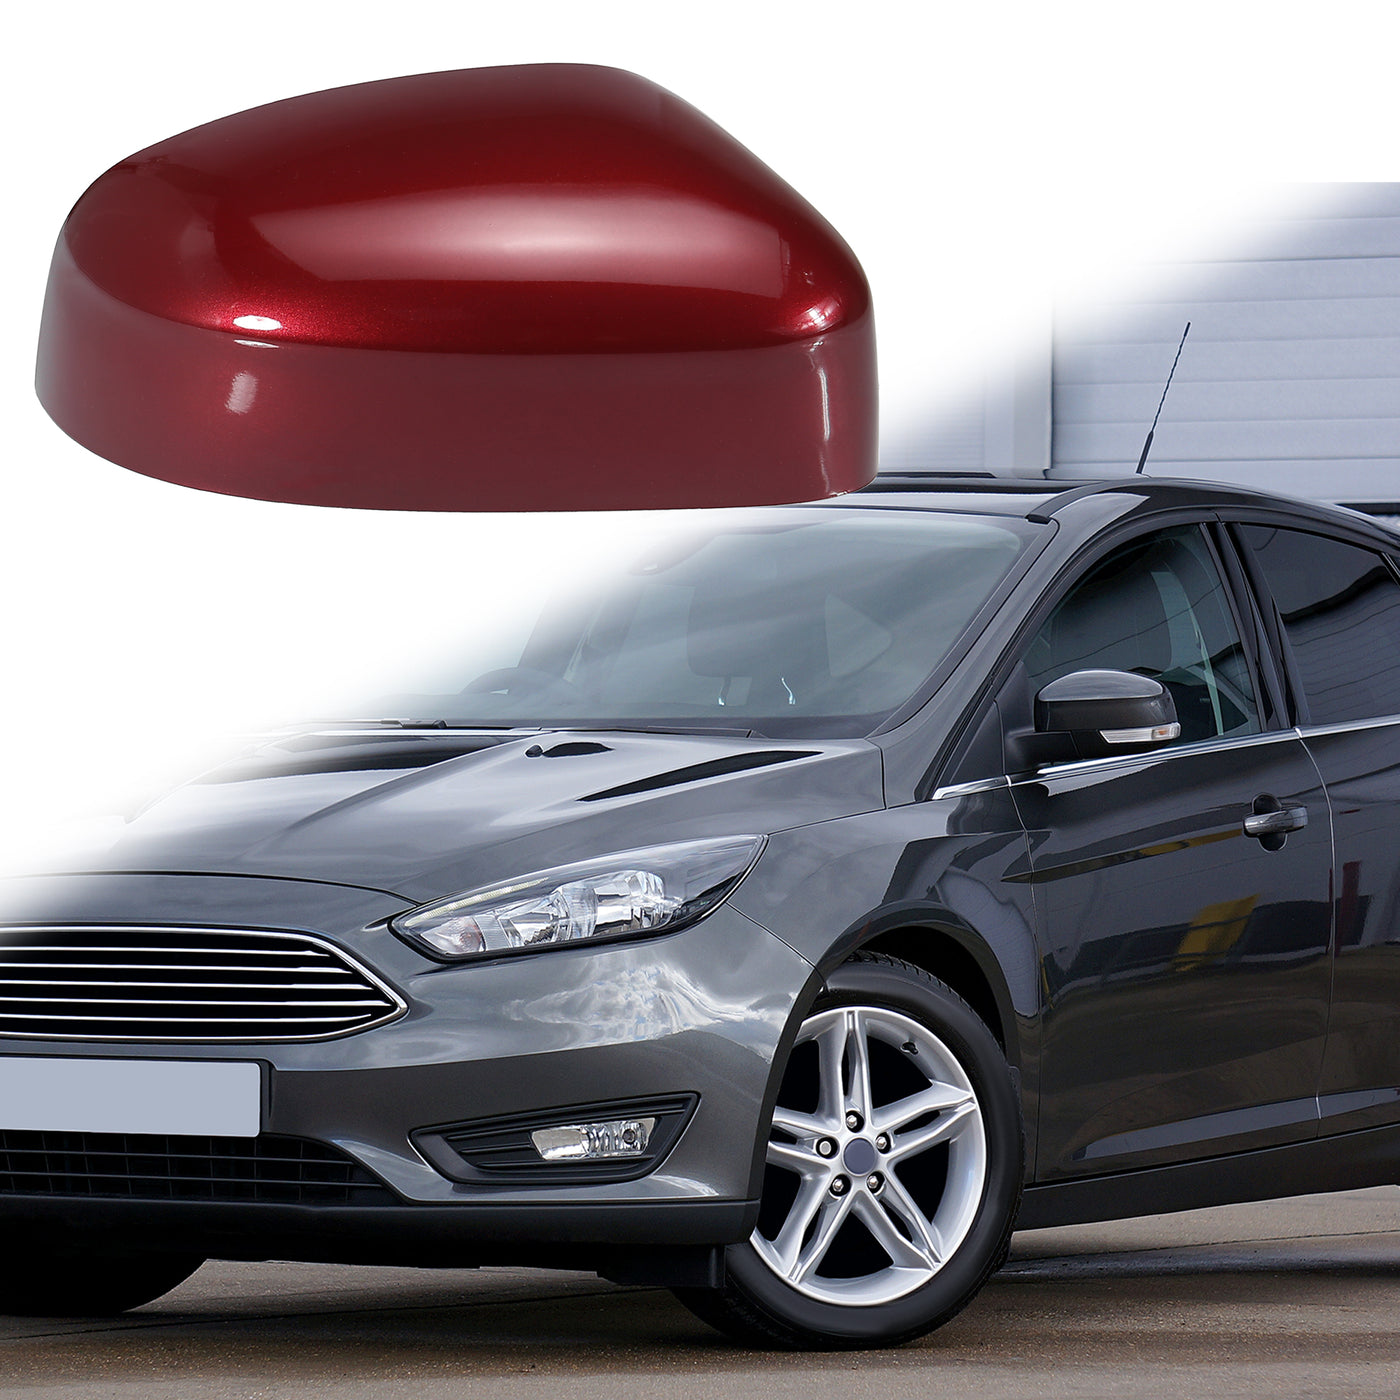 X AUTOHAUX Red Right Side Car Side Door Wing Mirror Cover Rear View Mirror Cap for Ford Focus MK2 Facelift 2008-2011 for Ford Focus MK3 2012-2017